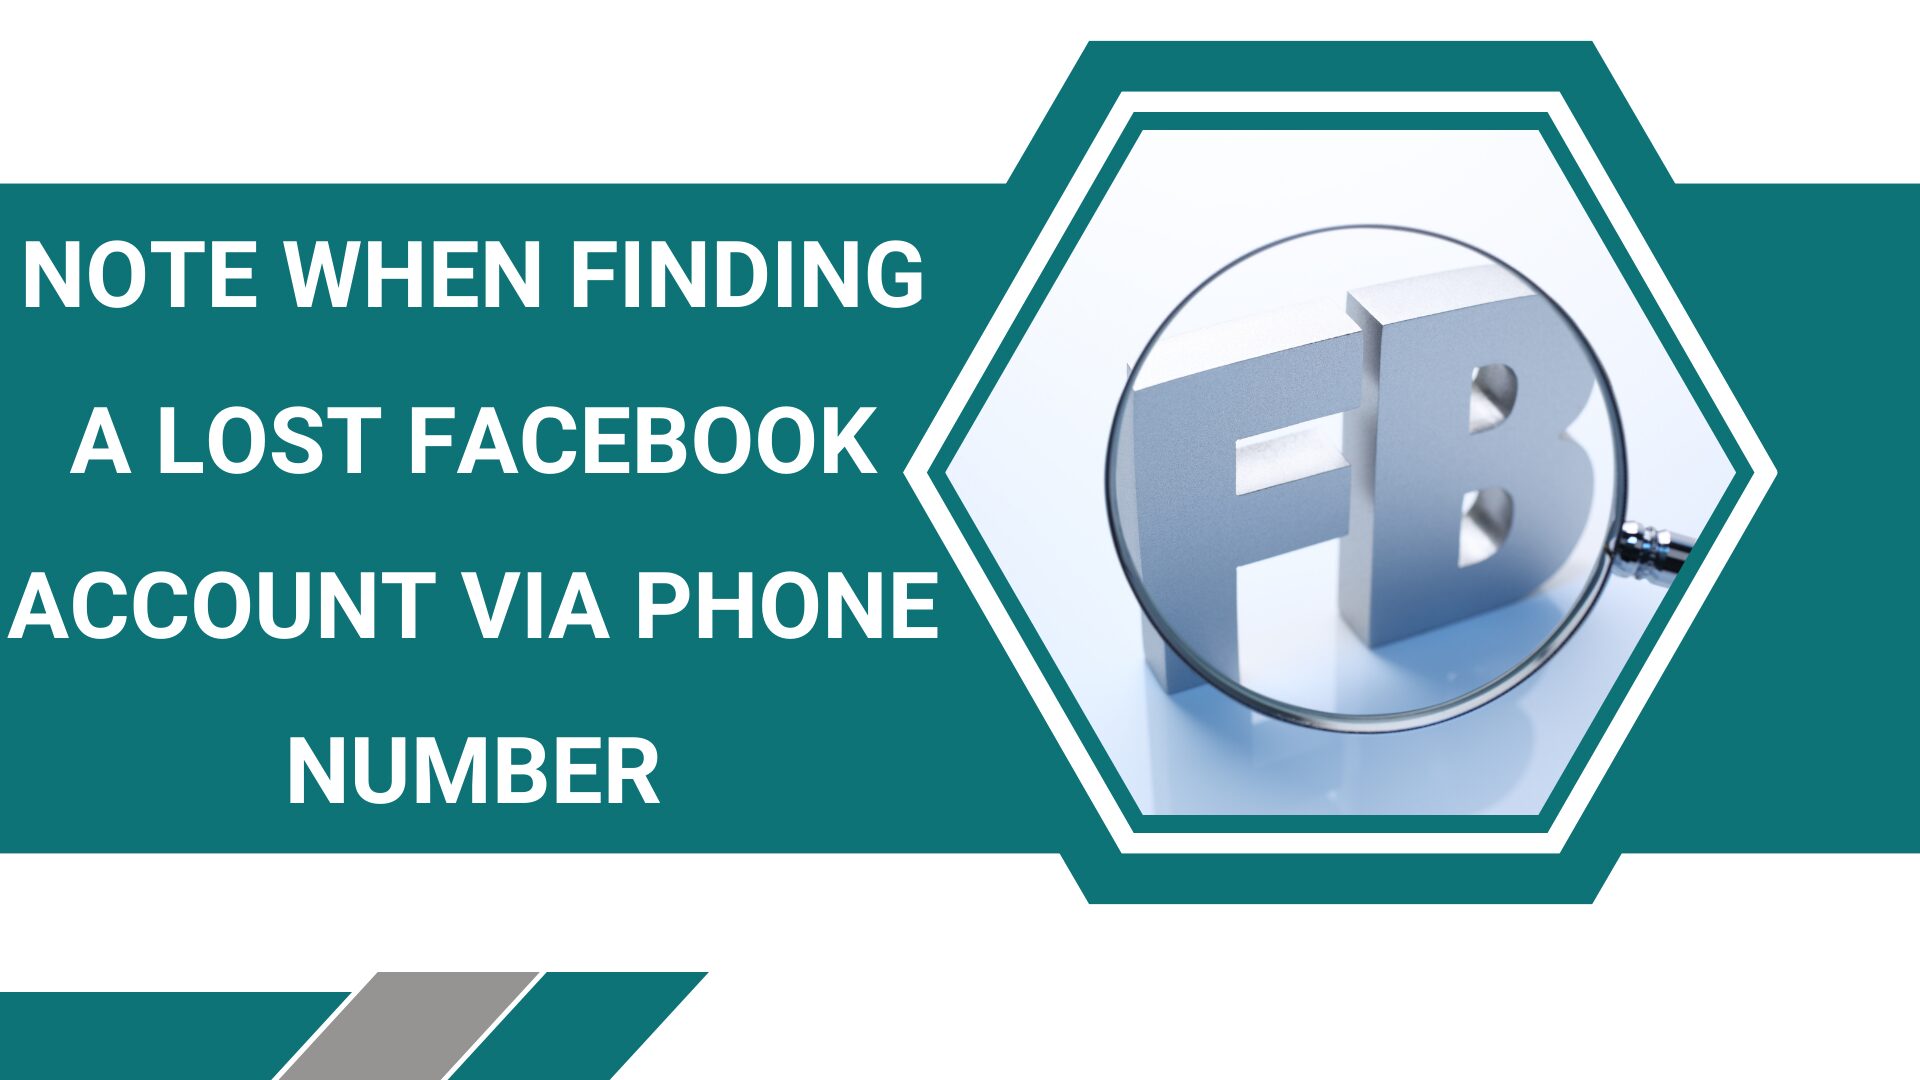 Note when finding a lost Facebook account via phone number